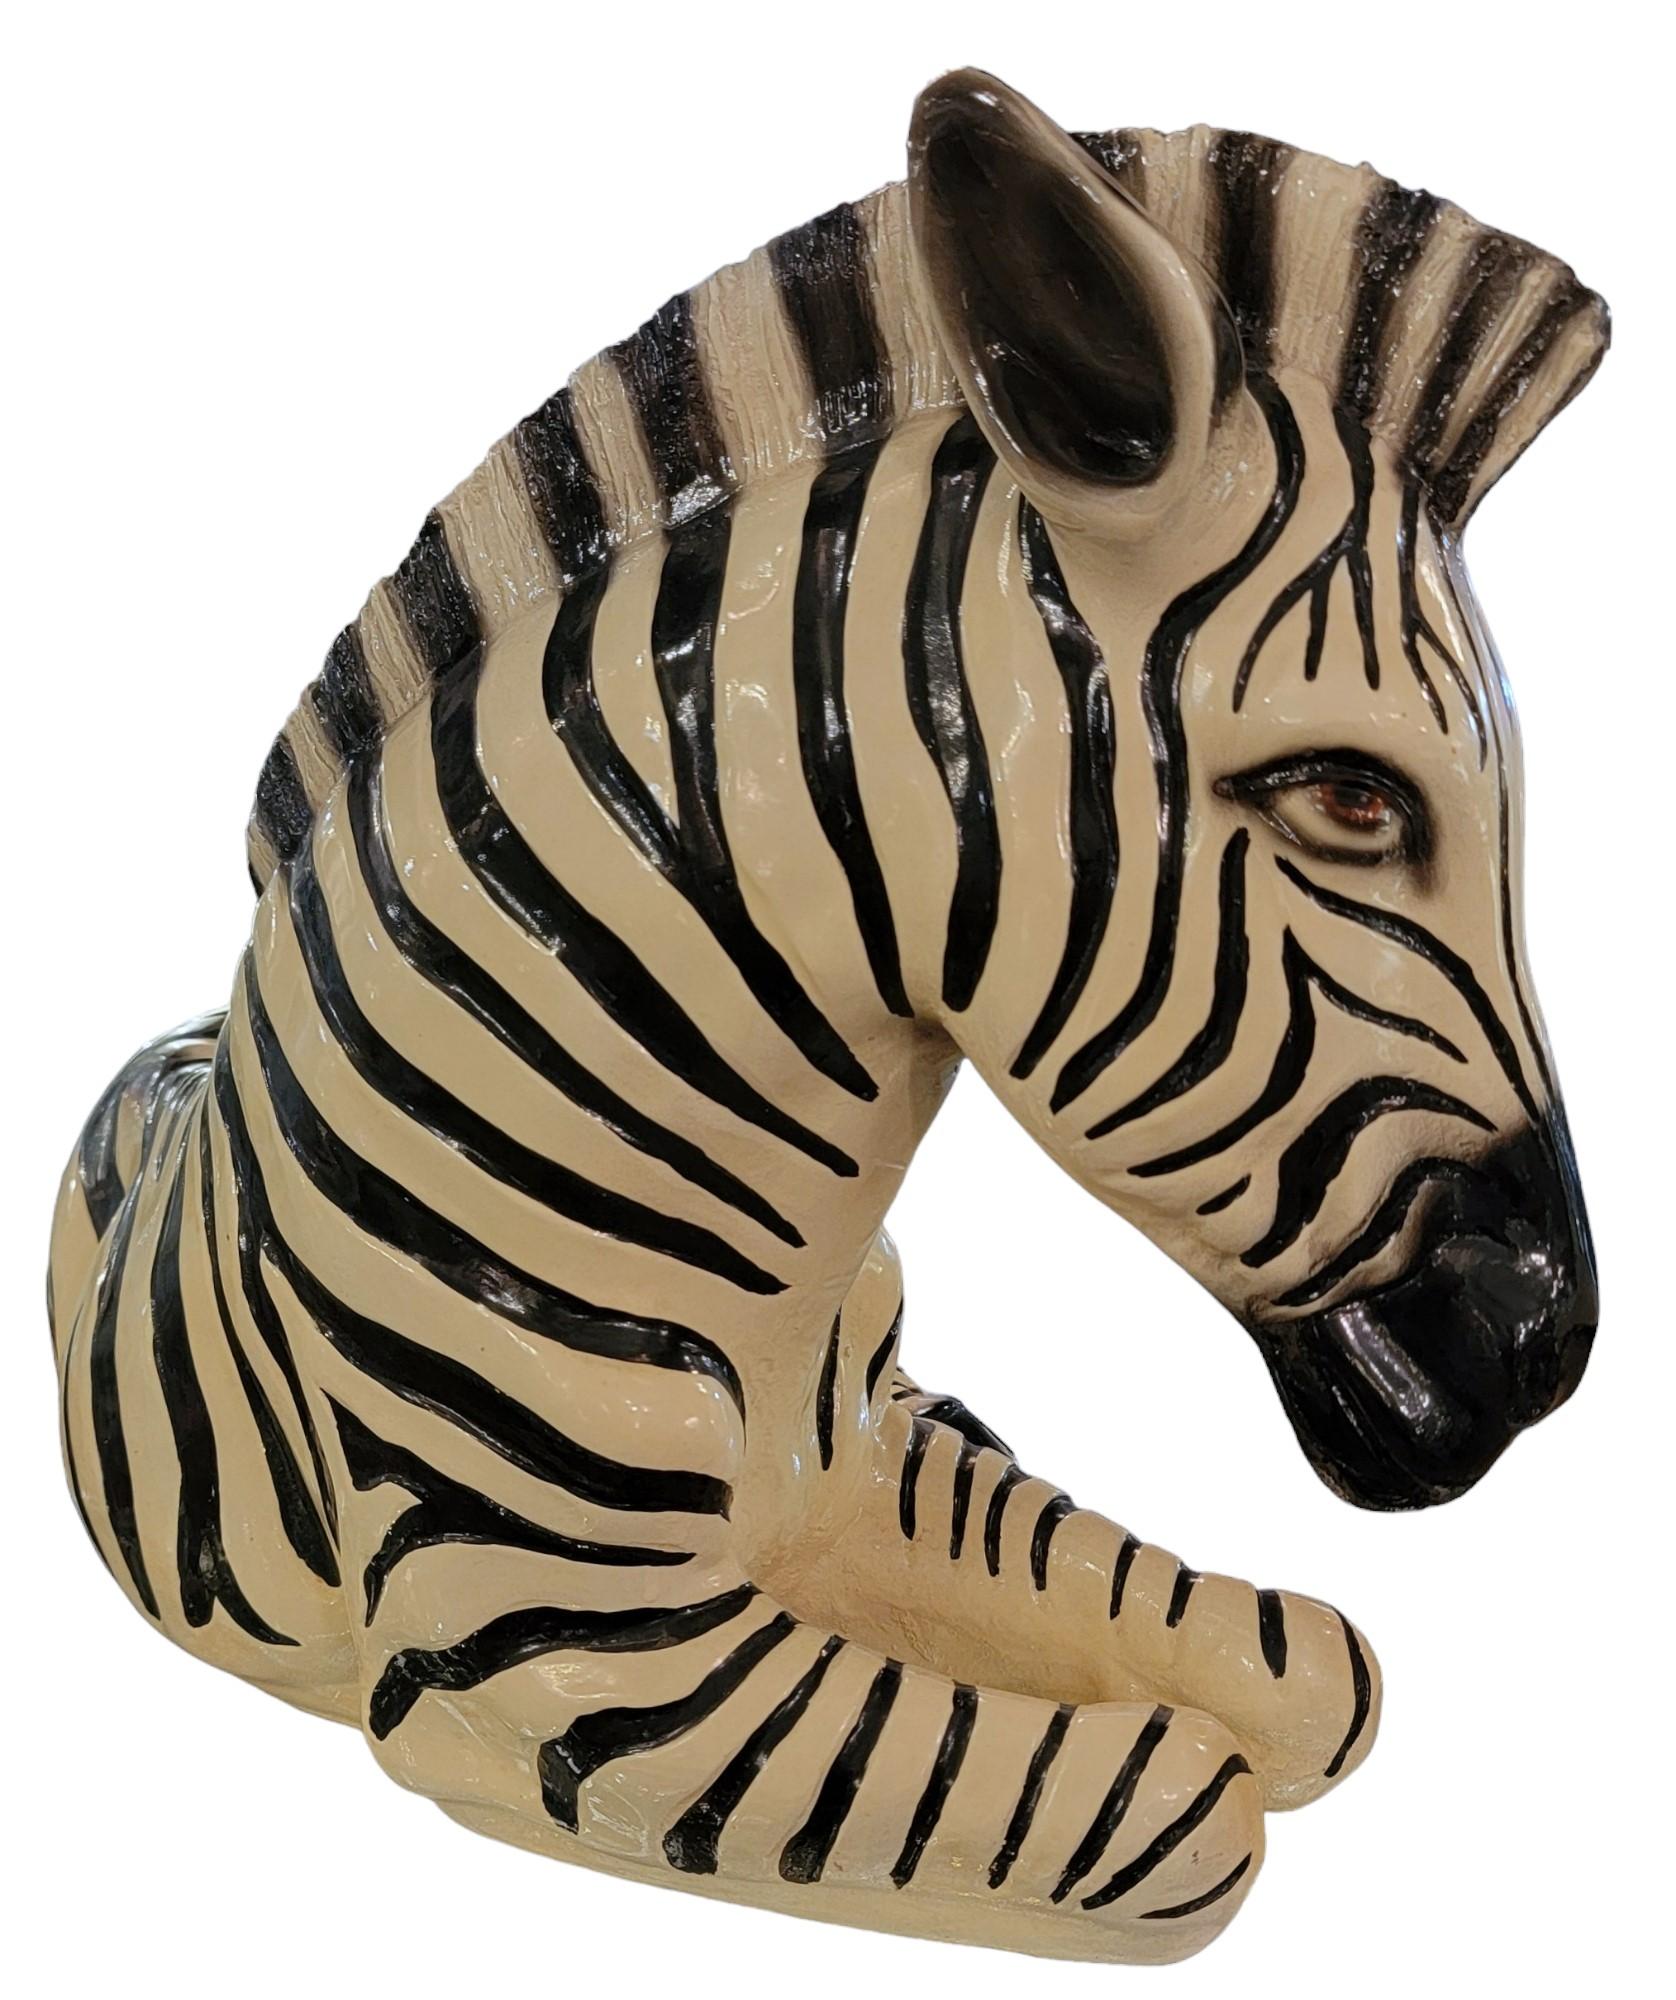 1970s Marwal Industries Baby Resin Zebra Sculpture In Good Condition For Sale In Pasadena, CA